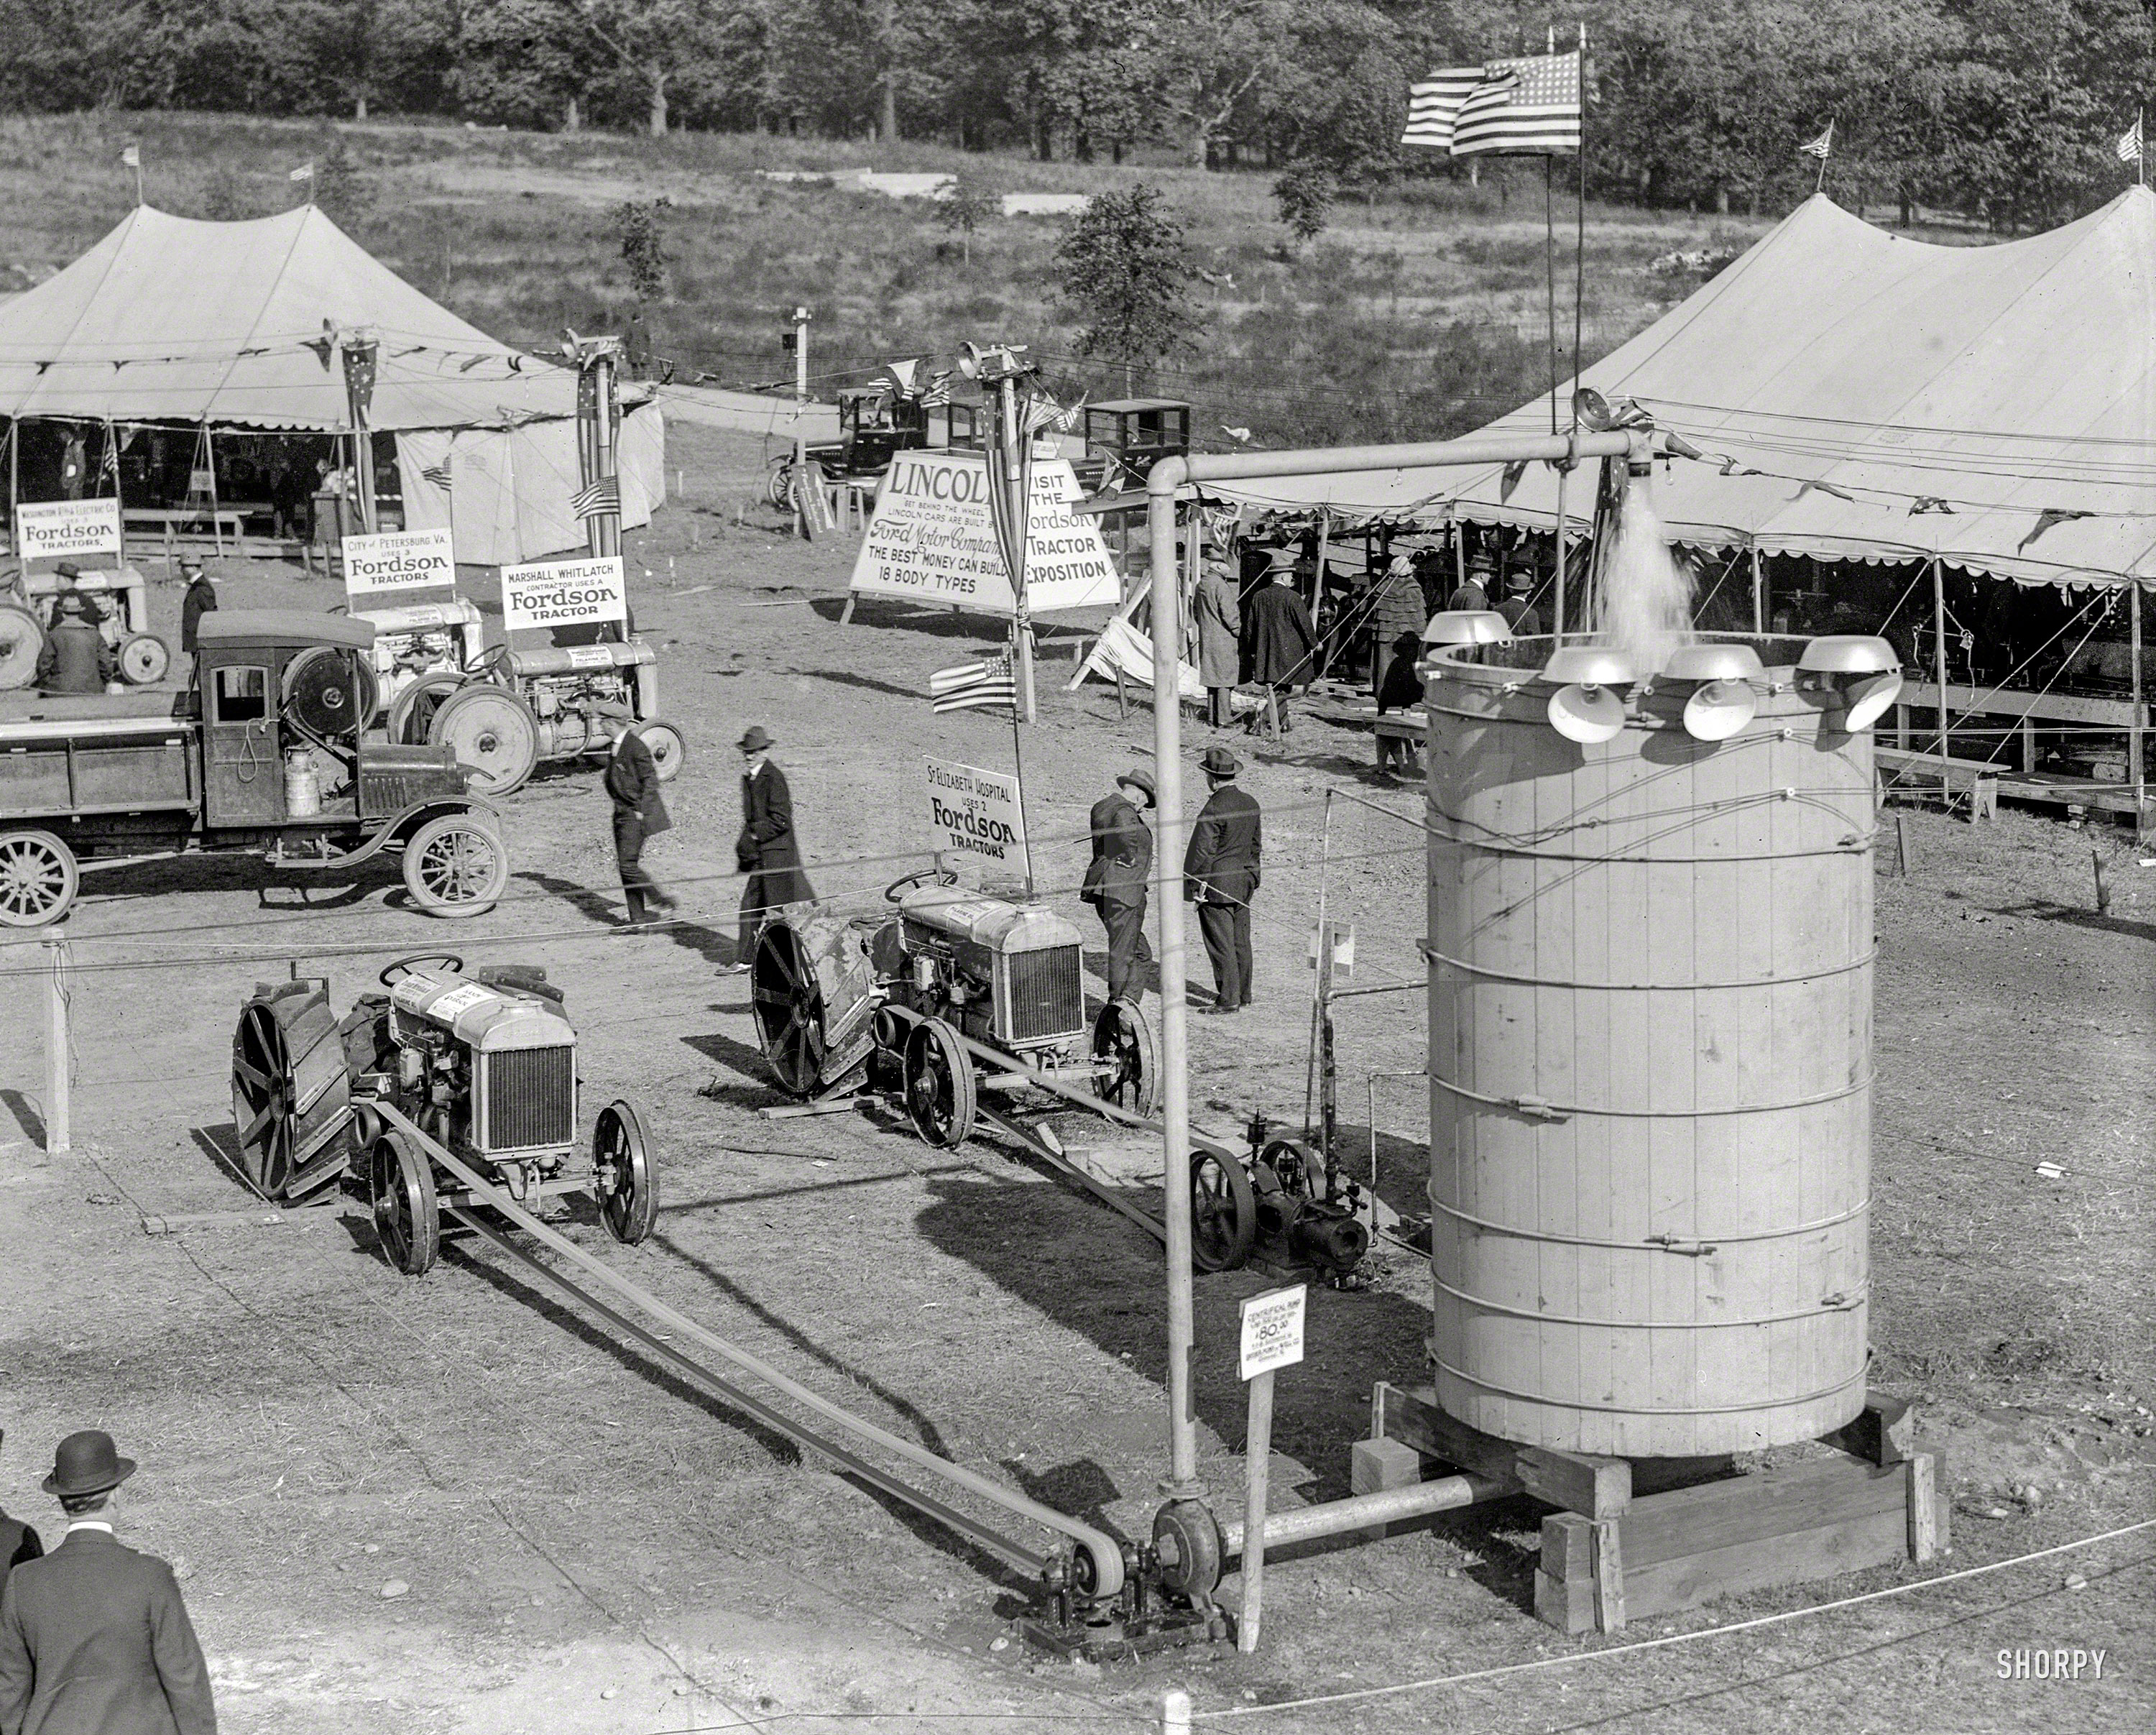 October 1922. Washington, D.C. "Fordson tractor exposition at Camp Meigs." National Photo Company Collection glass negative. View full size.